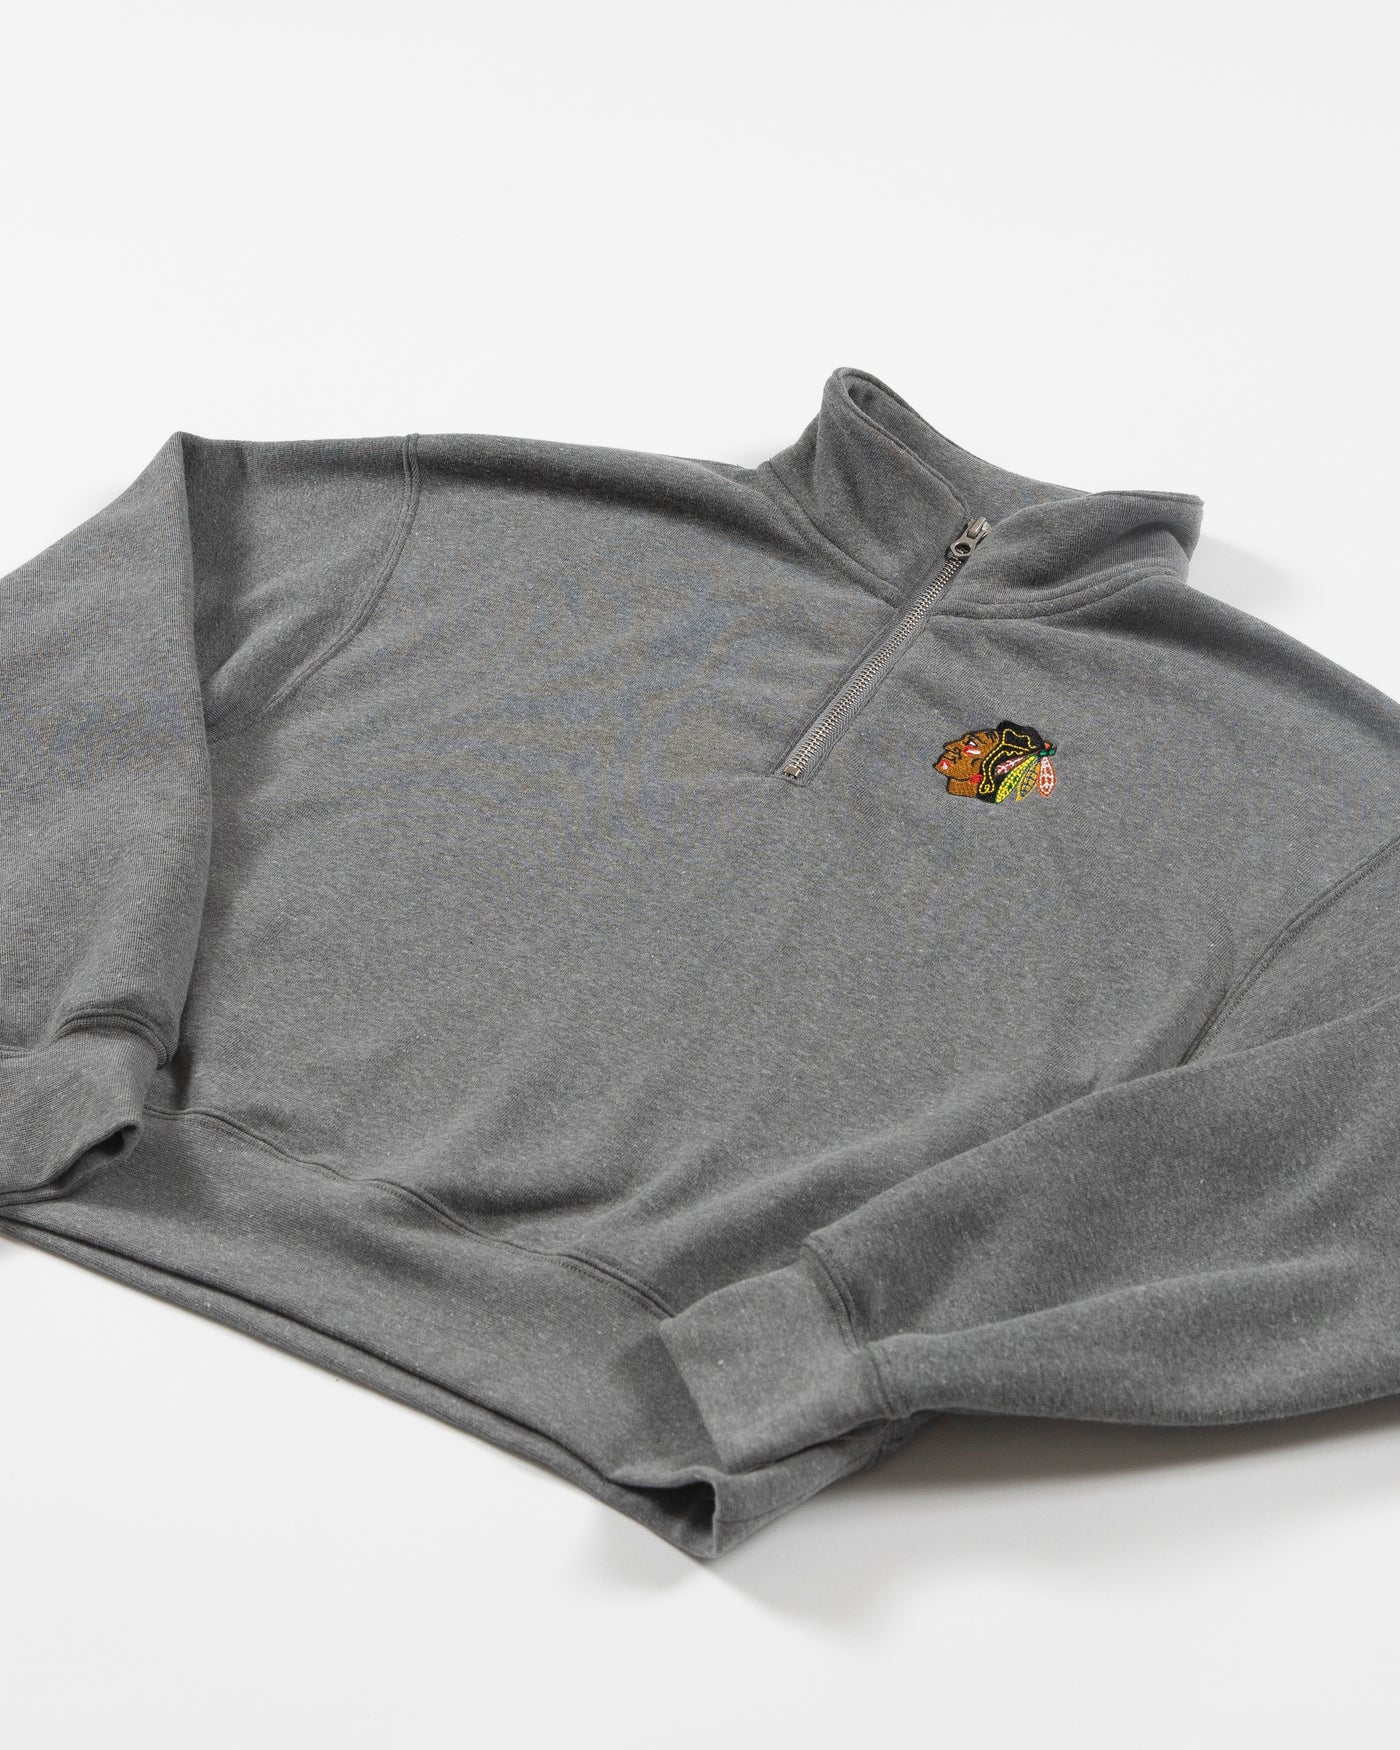 Zoozatz grey cropped quarter zip sweater with embroidered primary logo on left chest - detail lay flat 